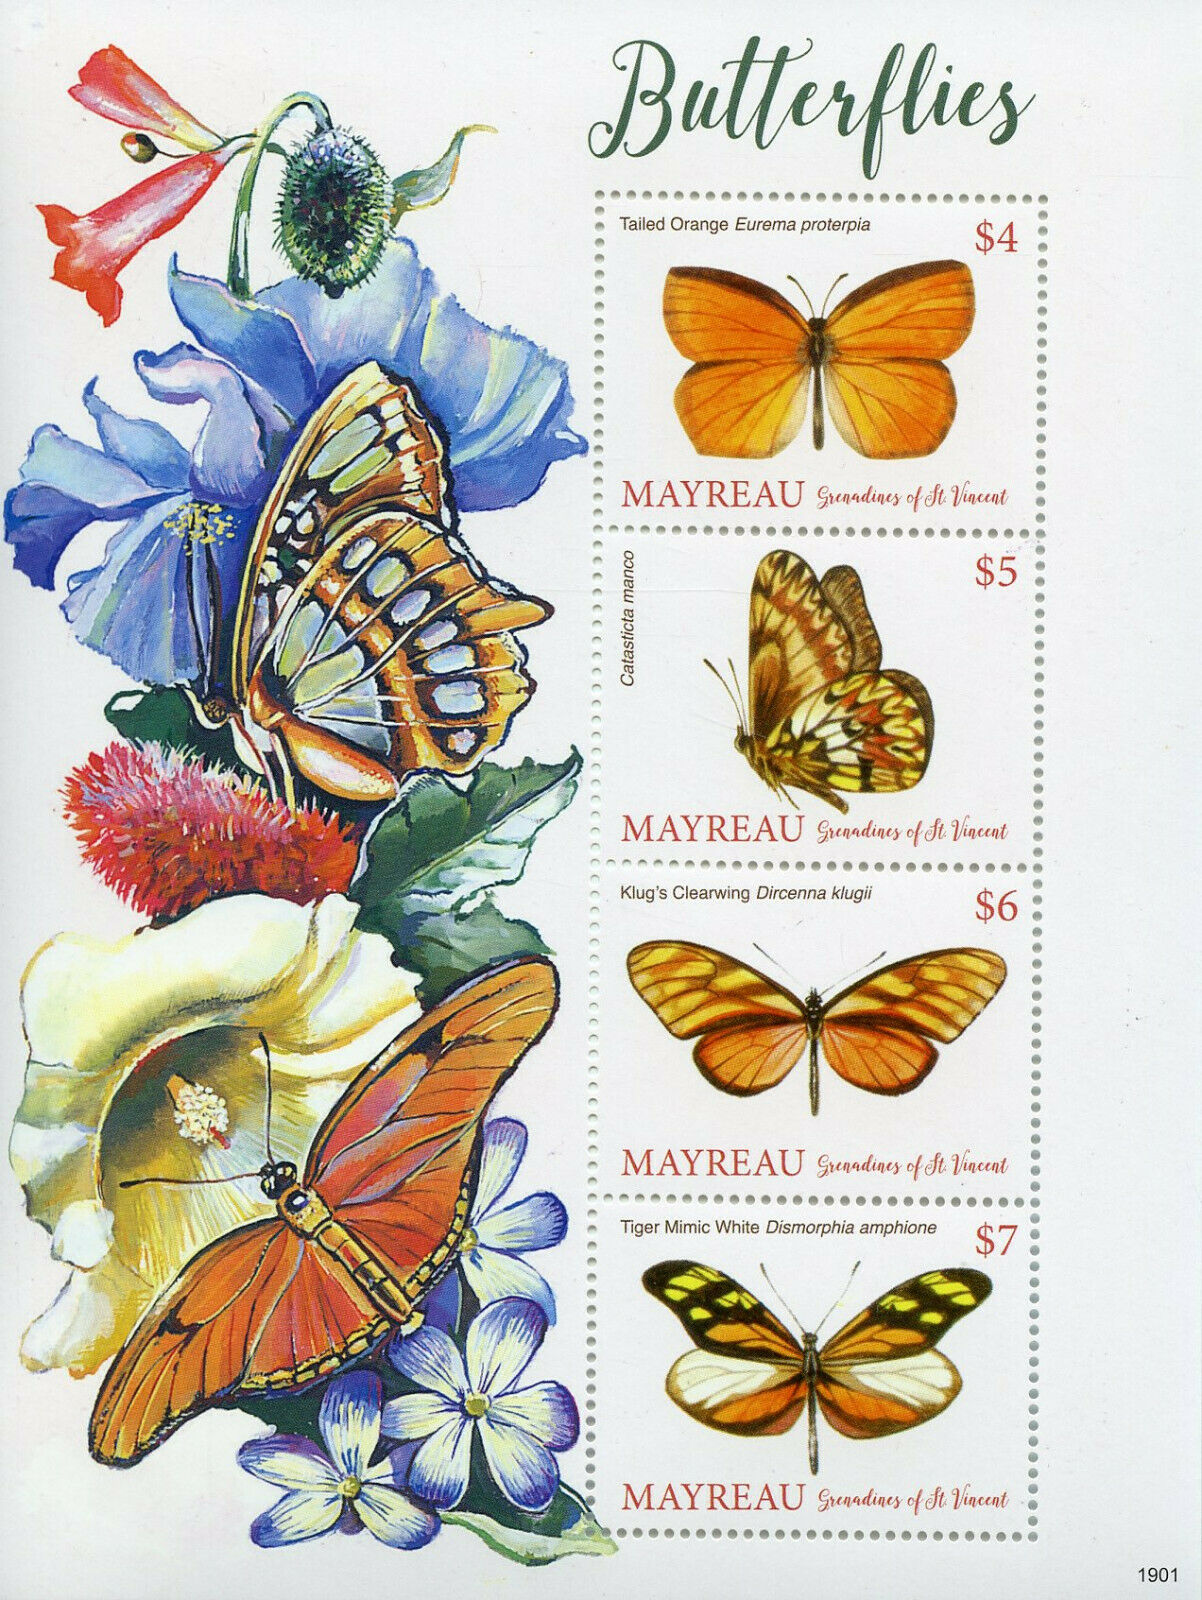 Mayreau Grenadines St Vincent 2019 MNH Butterflies Stamps Butterfly 4v M/S